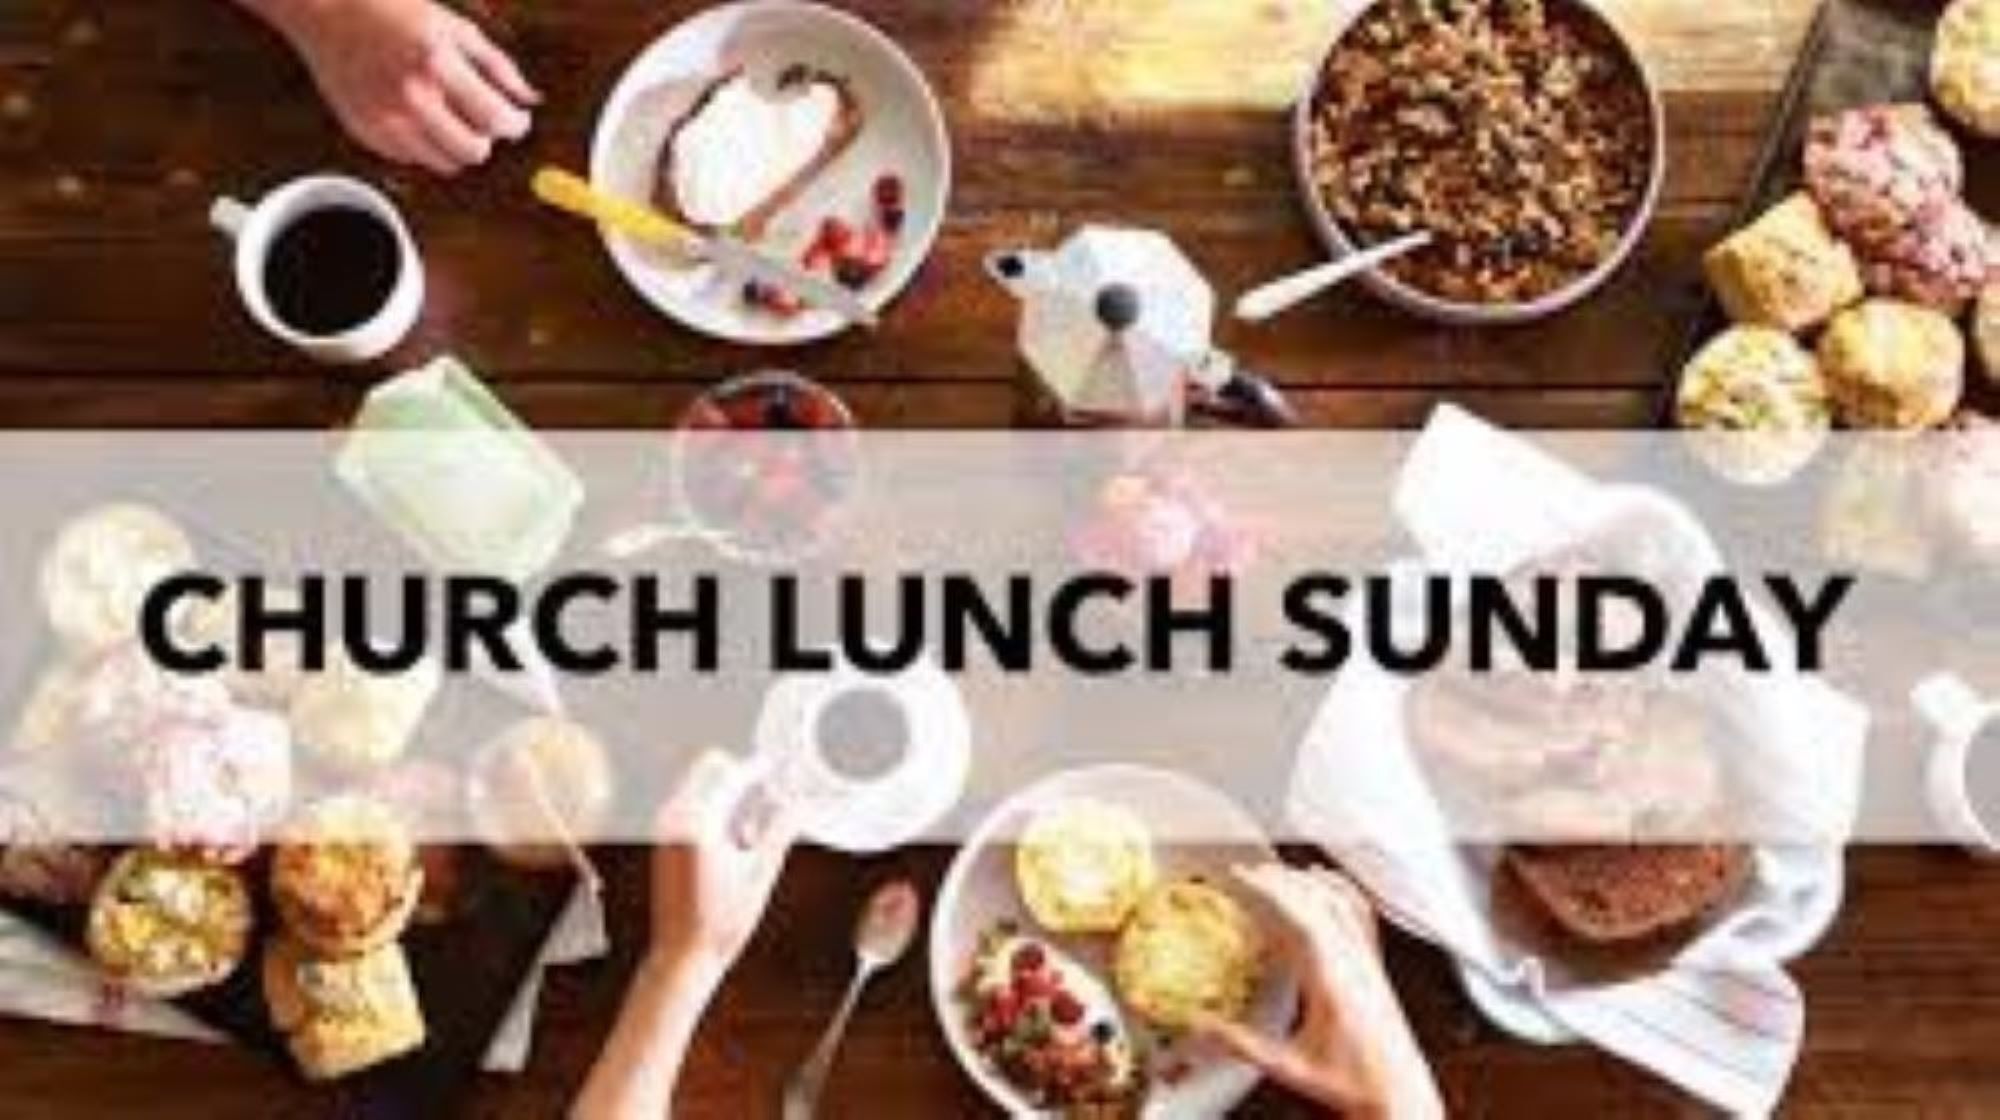 Invite people to join Sunday church lunch